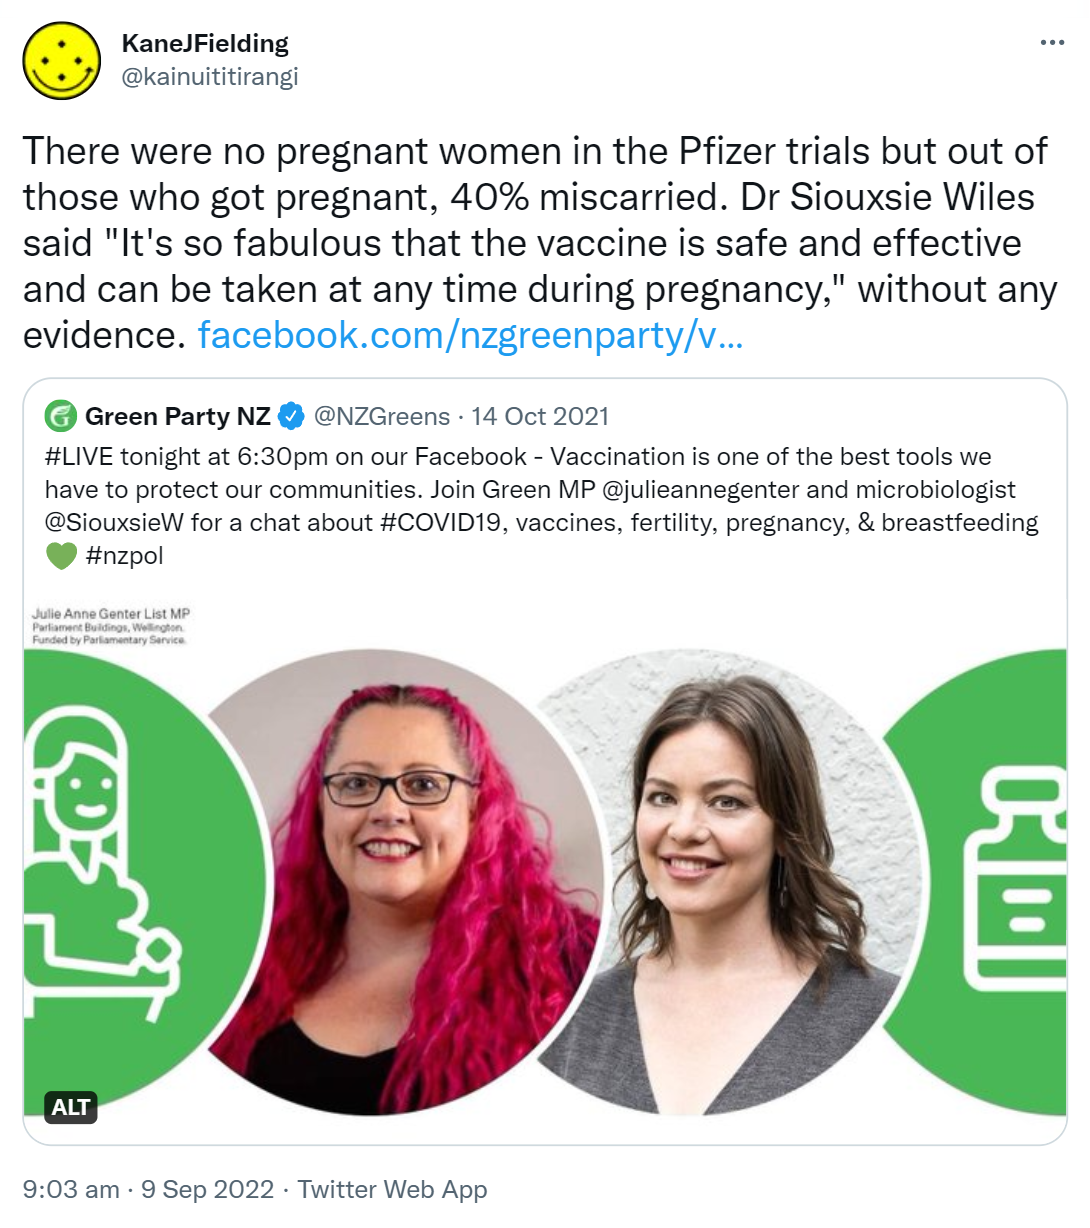 There were no pregnant women in the Pfizer trials but out of those who got pregnant, 40% miscarried. Doctor Siouxsie Wiles said, It's so fabulous that the vaccine is safe and effective and can be taken at any time during pregnancy, without any evidence. facebook.com/nzgreenparty. Quote Tweet. Green Party NZ @NZGreens. 14 Oct 2021. Hashtag LIVE tonight at 6:30pm on our Facebook - Vaccination is one of the best tools we have to protect our communities. Join Green MP @julieannegenter and microbiologist @SiouxsieW for a chat about Hashtag COVID19 vaccines fertility pregnancy & breastfeeding. Hashtag NZ Pol. 9:03 am · 9 Sep 2022.